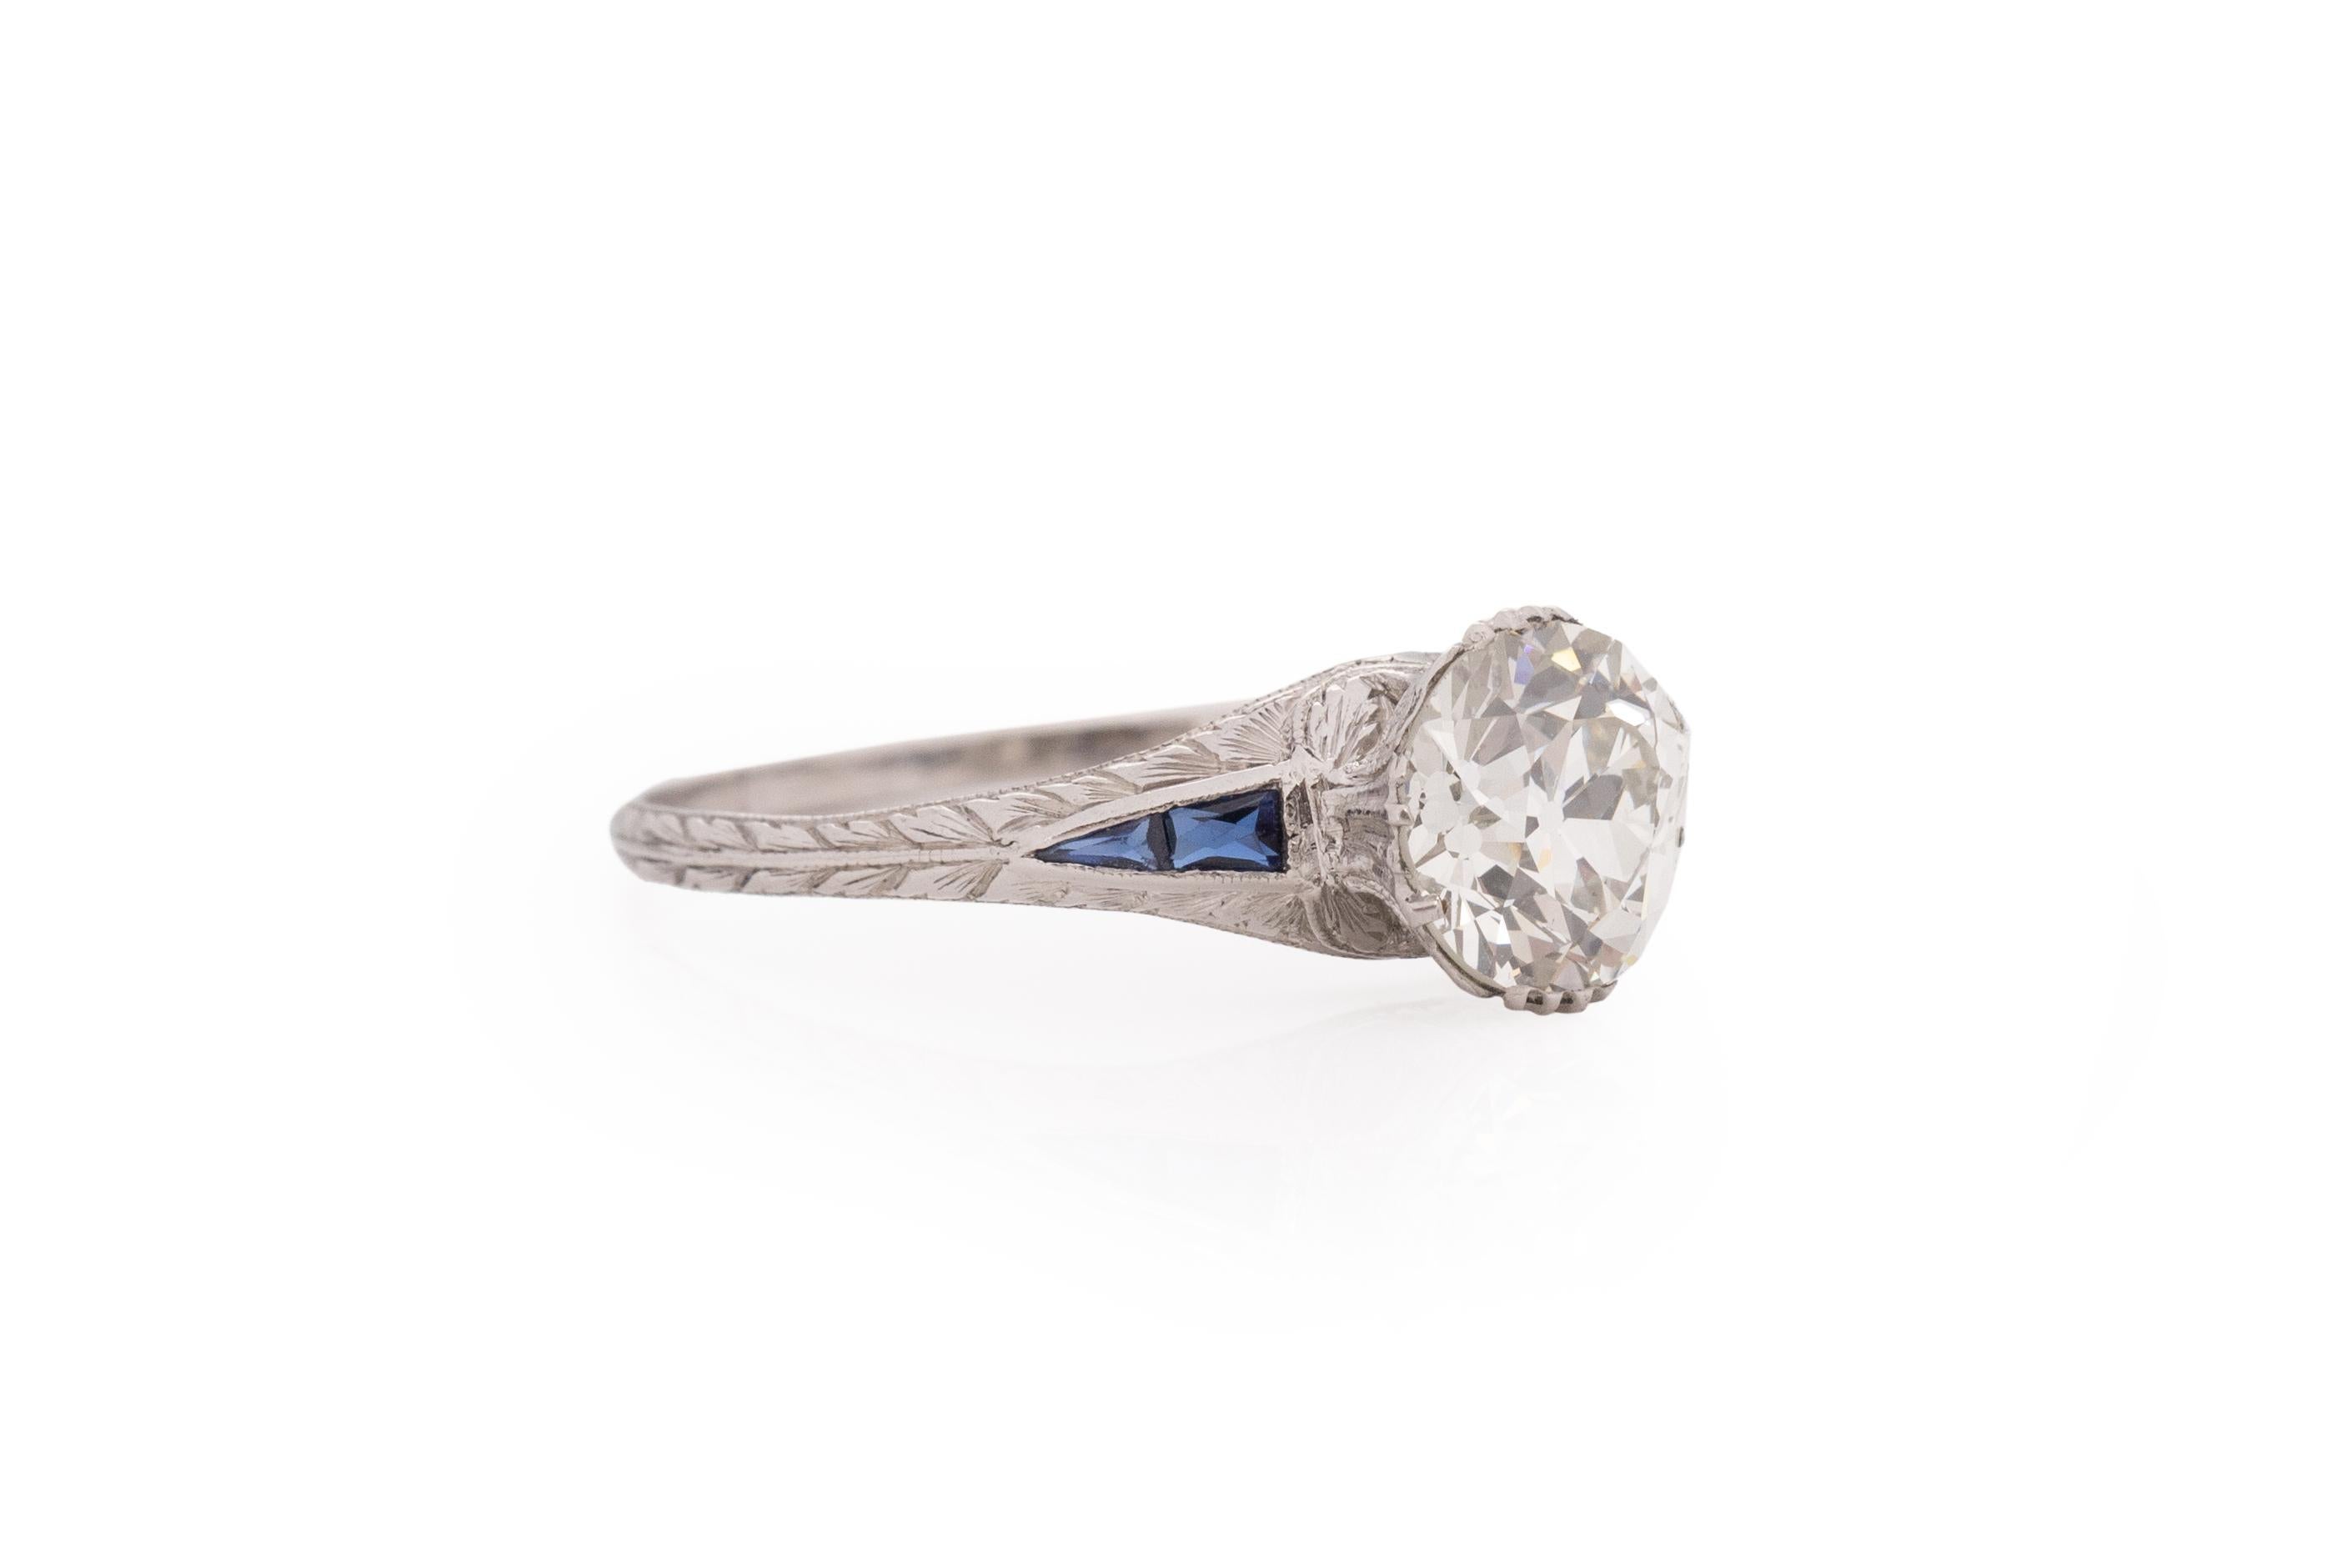 Ring Size: 9
Metal Type: Platinum [Hallmarked, and Tested]
Weight: 3.5 grams

Center Diamond Details:
GIA REPORT #: 6217852349
Weight: 2.17carat
Cut: Old European brilliant
Color: K
Clarity: VS2
Measurements: 8.04mm x 7.96mm x 5.13

Side Stone